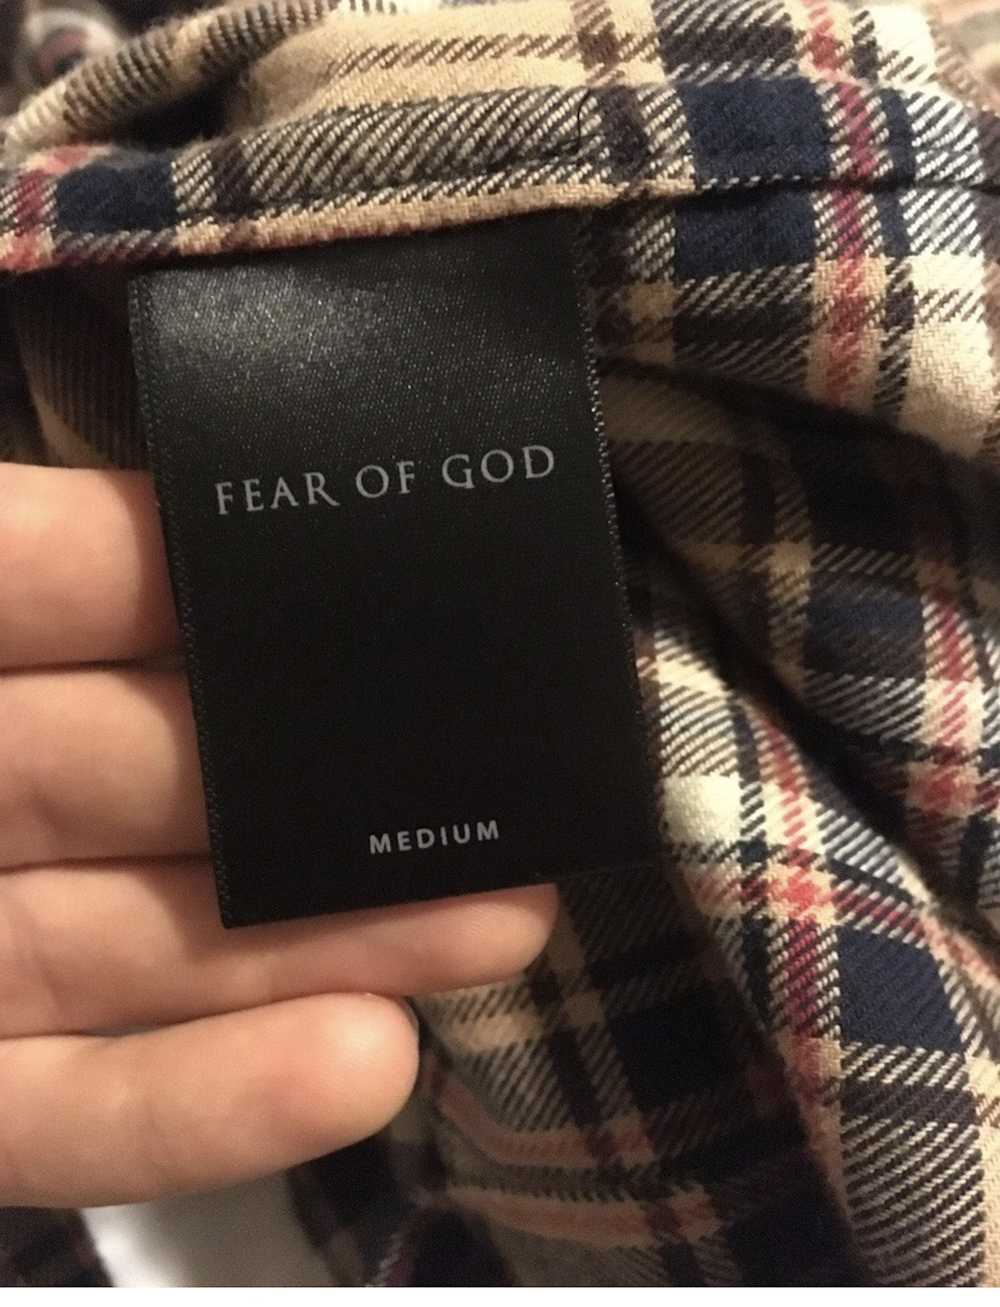 Fear of God Fear of god flannel fourth collection - image 7